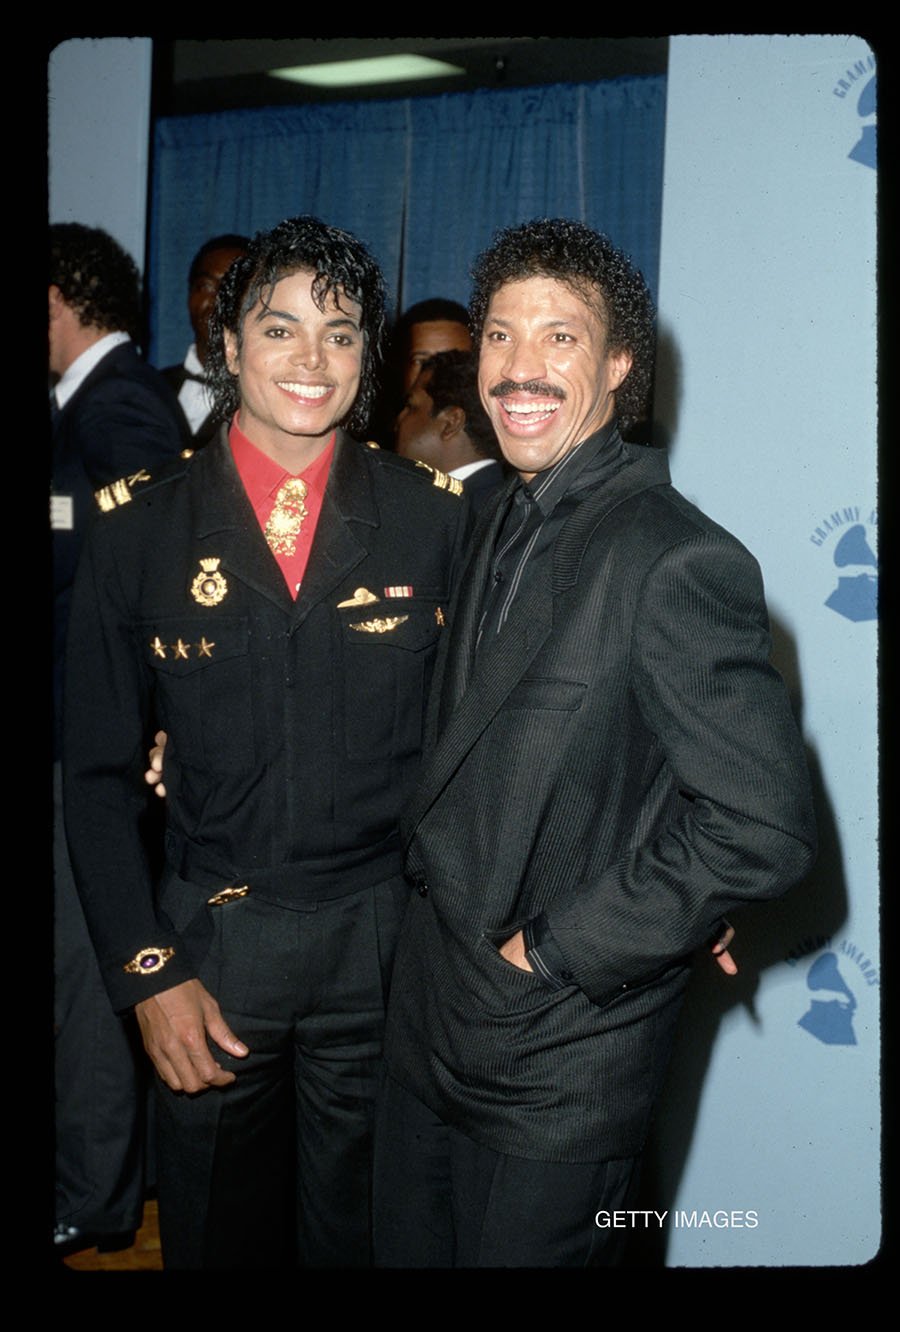 Lionel Richie On His Friendship With Michael